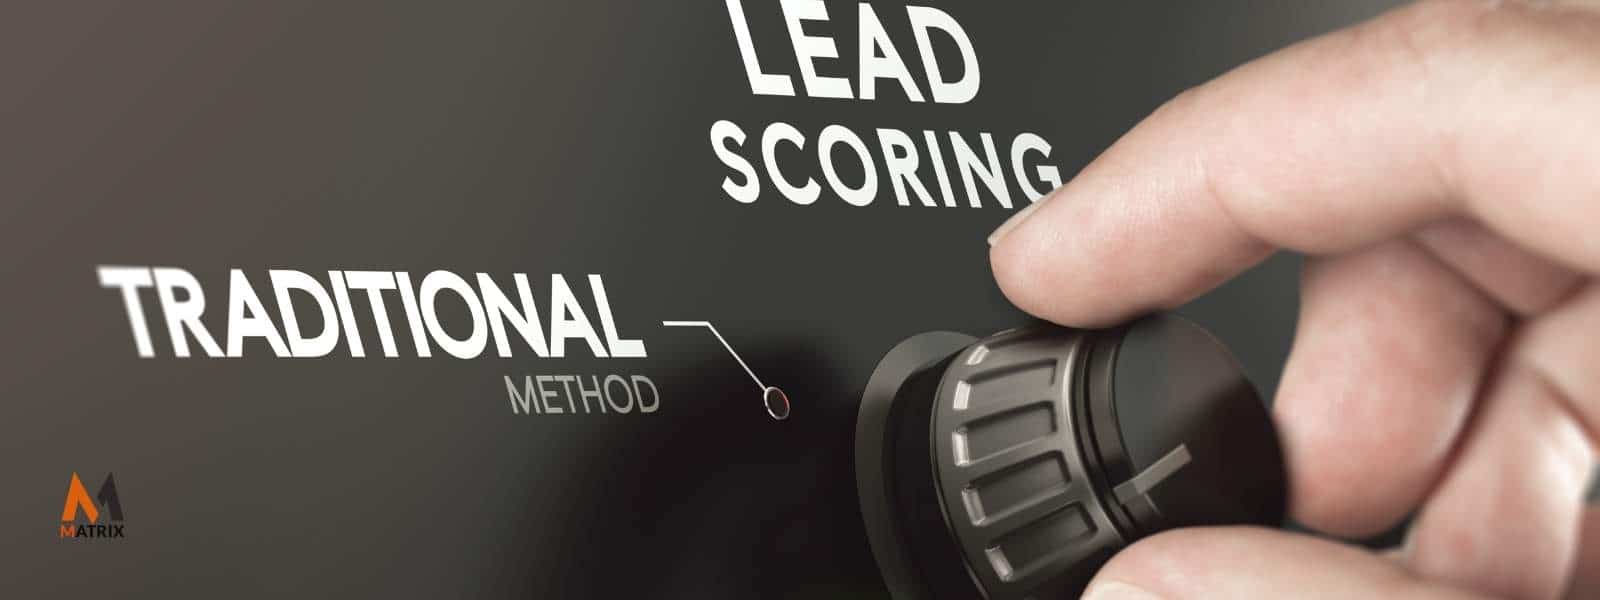 What Is lead scoring?